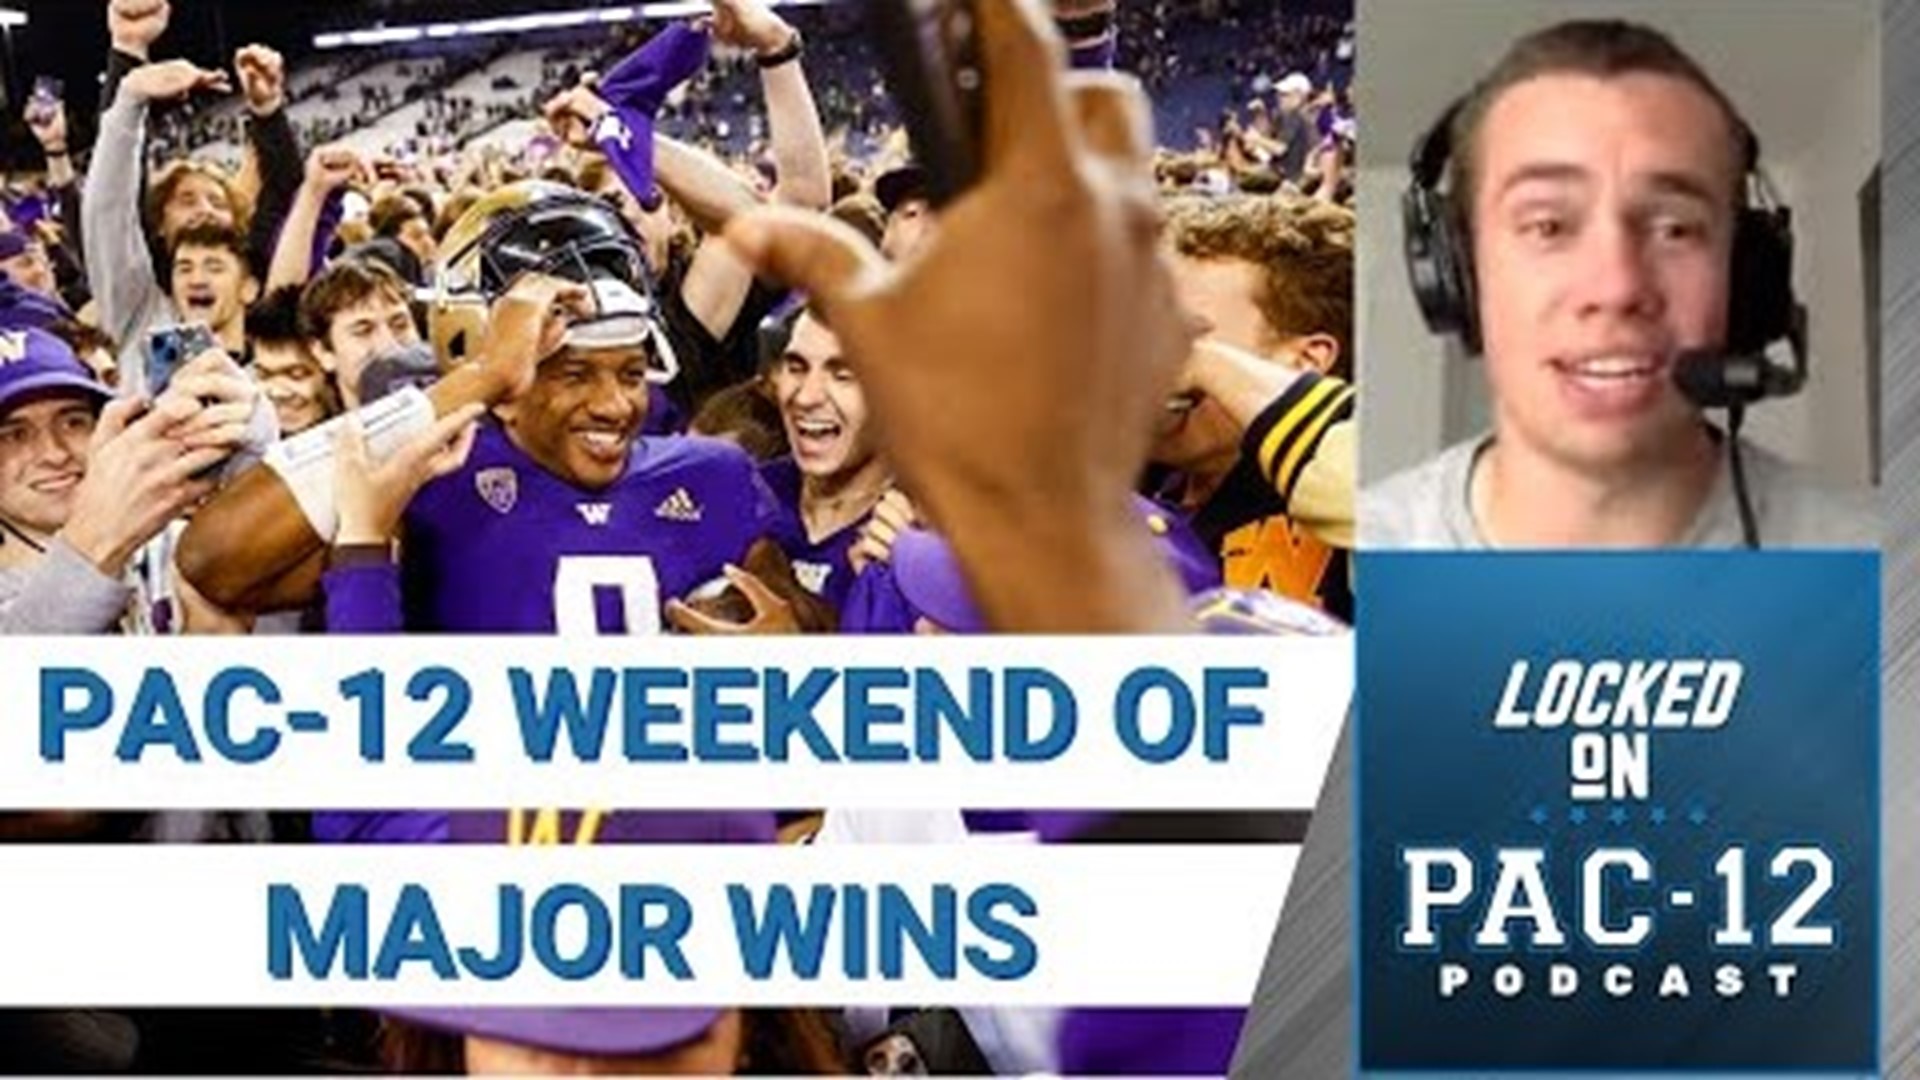 The Pac-12 saw two teams pick up DOMINANT wins against AP-ranked Top 15 opponents in week 3, including Washington over Michigan State and Oregon over BYU.